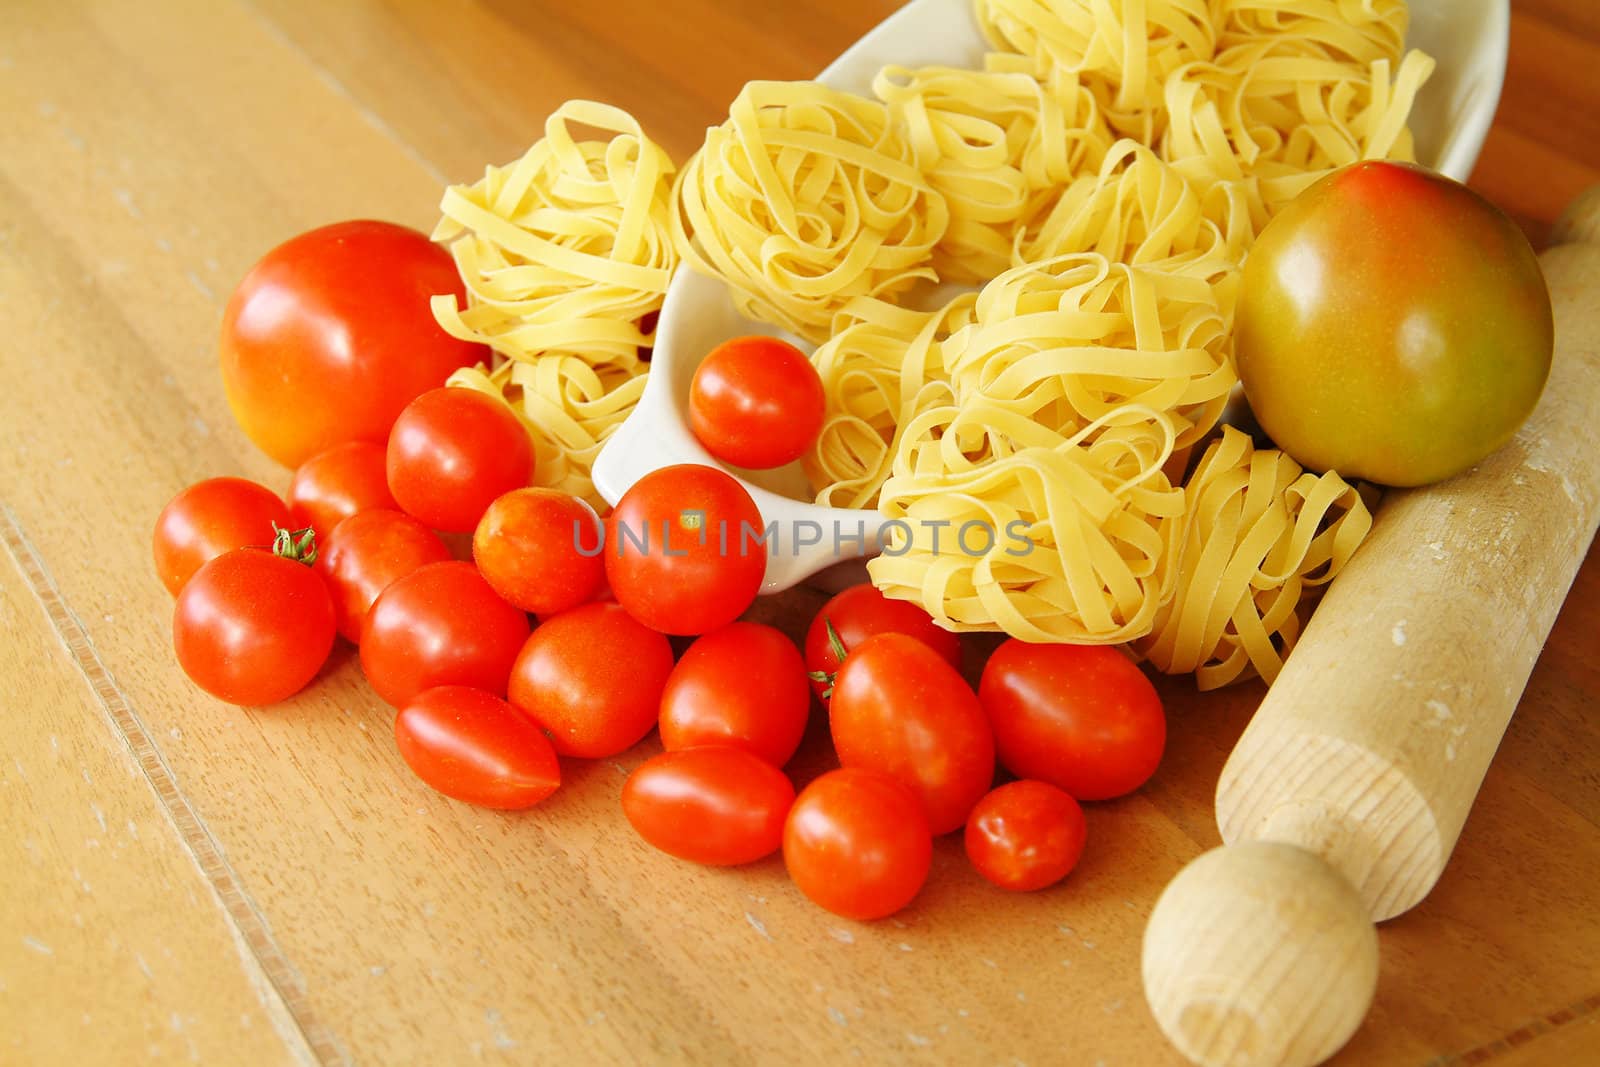 Tomato and pasta by silvie19